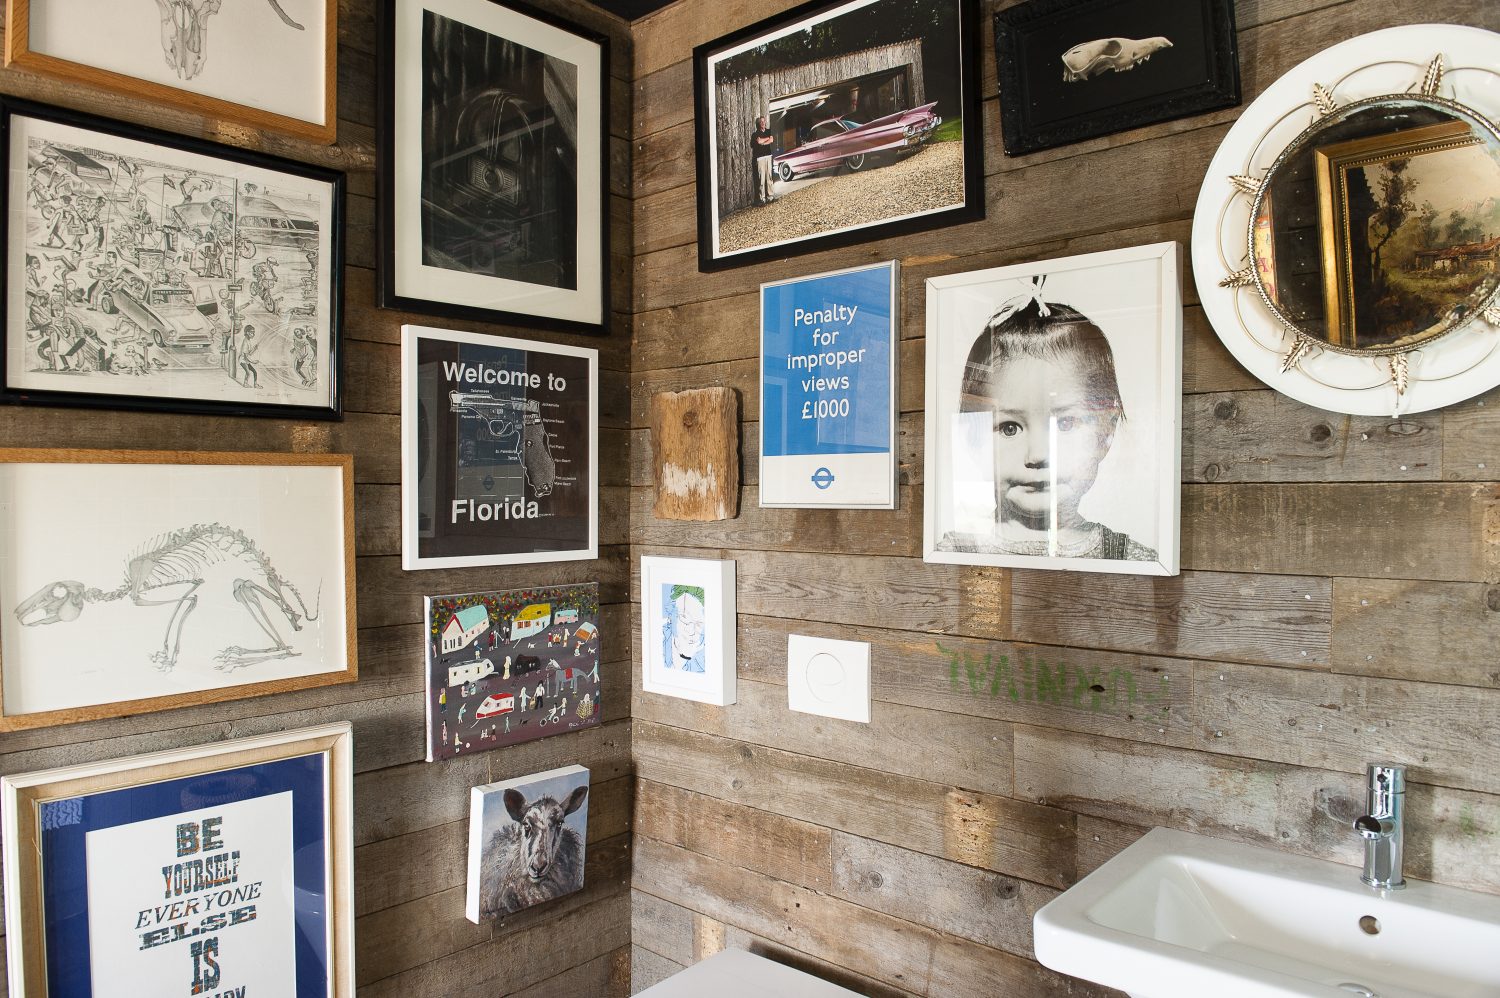 The bathroom walls are lined with an eclectic mix of artworks and photographs